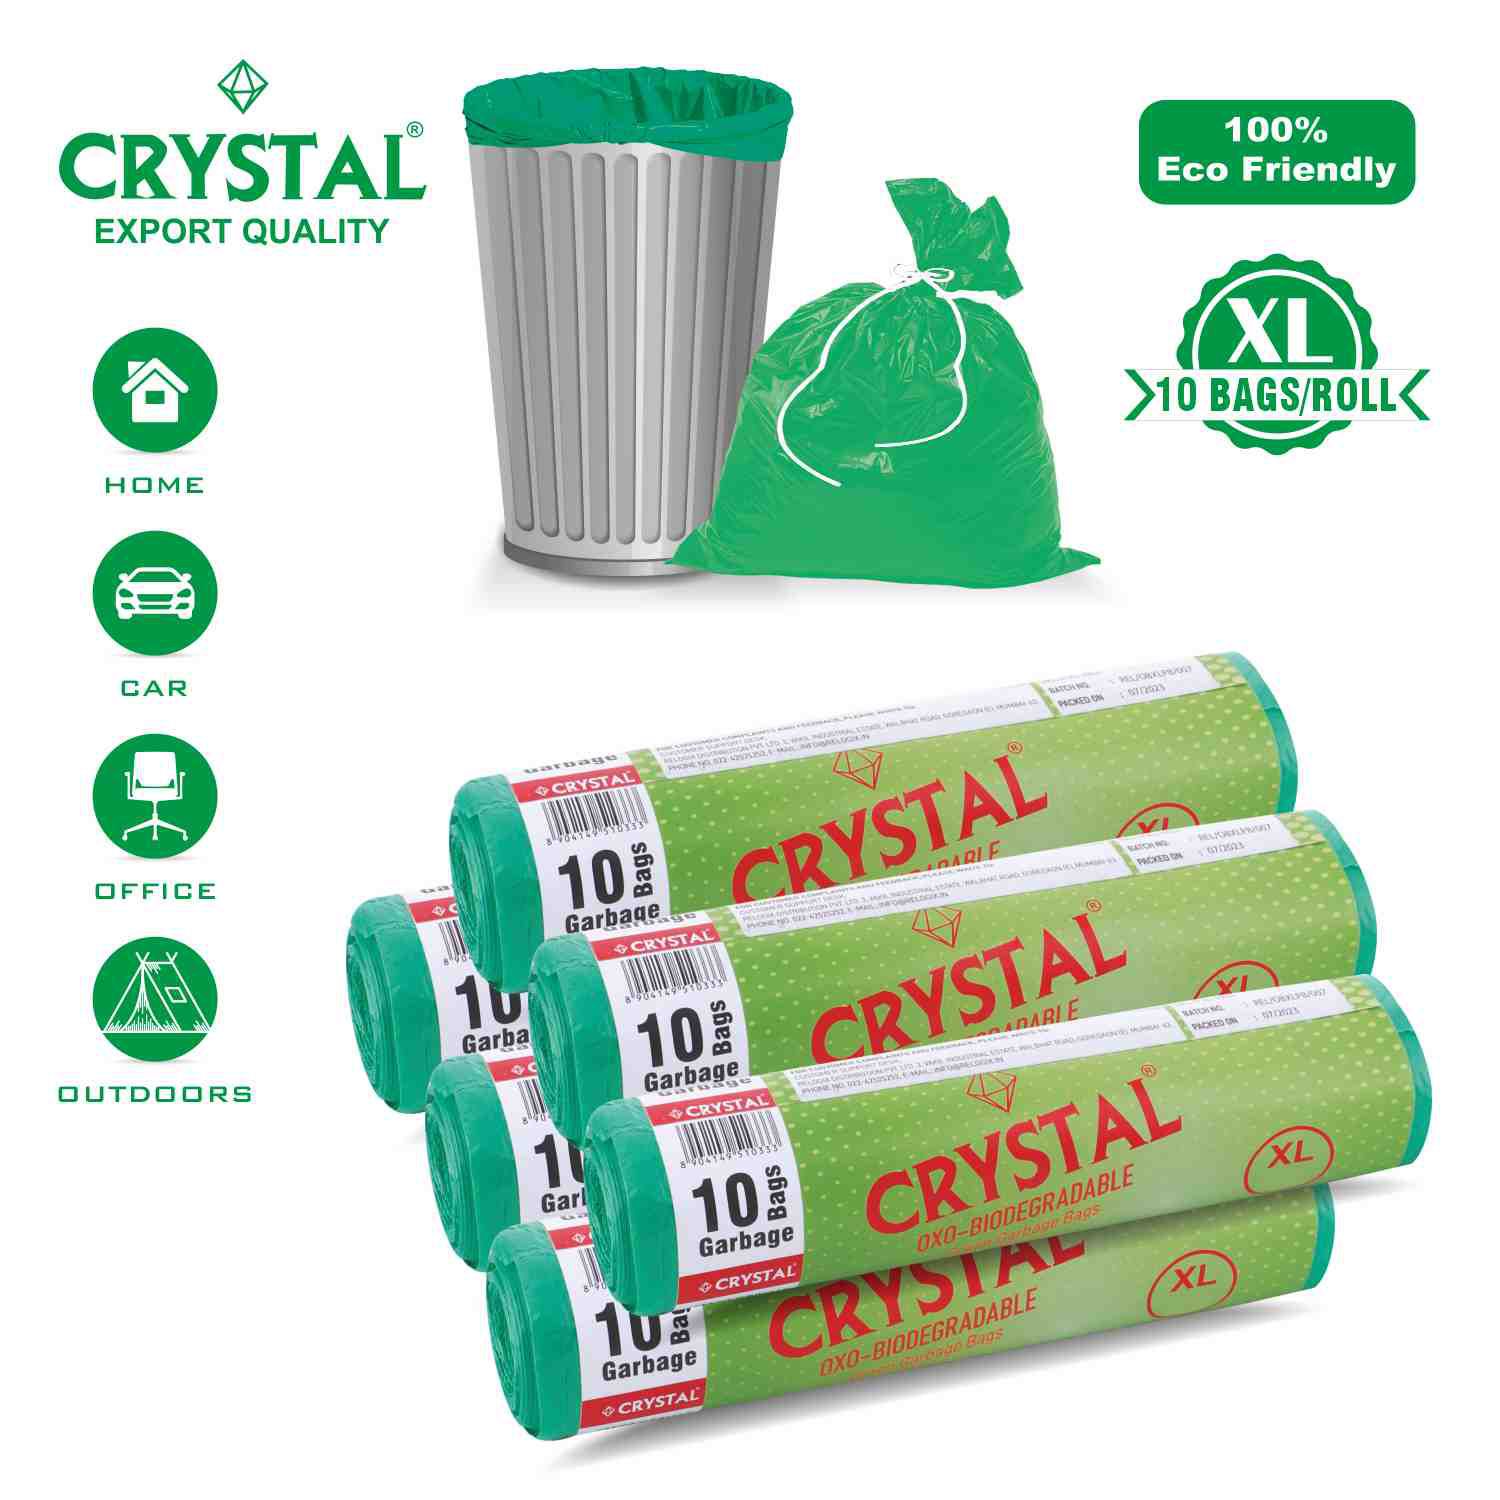     			Crystal Oxo Biodegradable Green Garbage Bags (30 x 37 inch, Extra Large) Pack of 6 (10 pieces each)